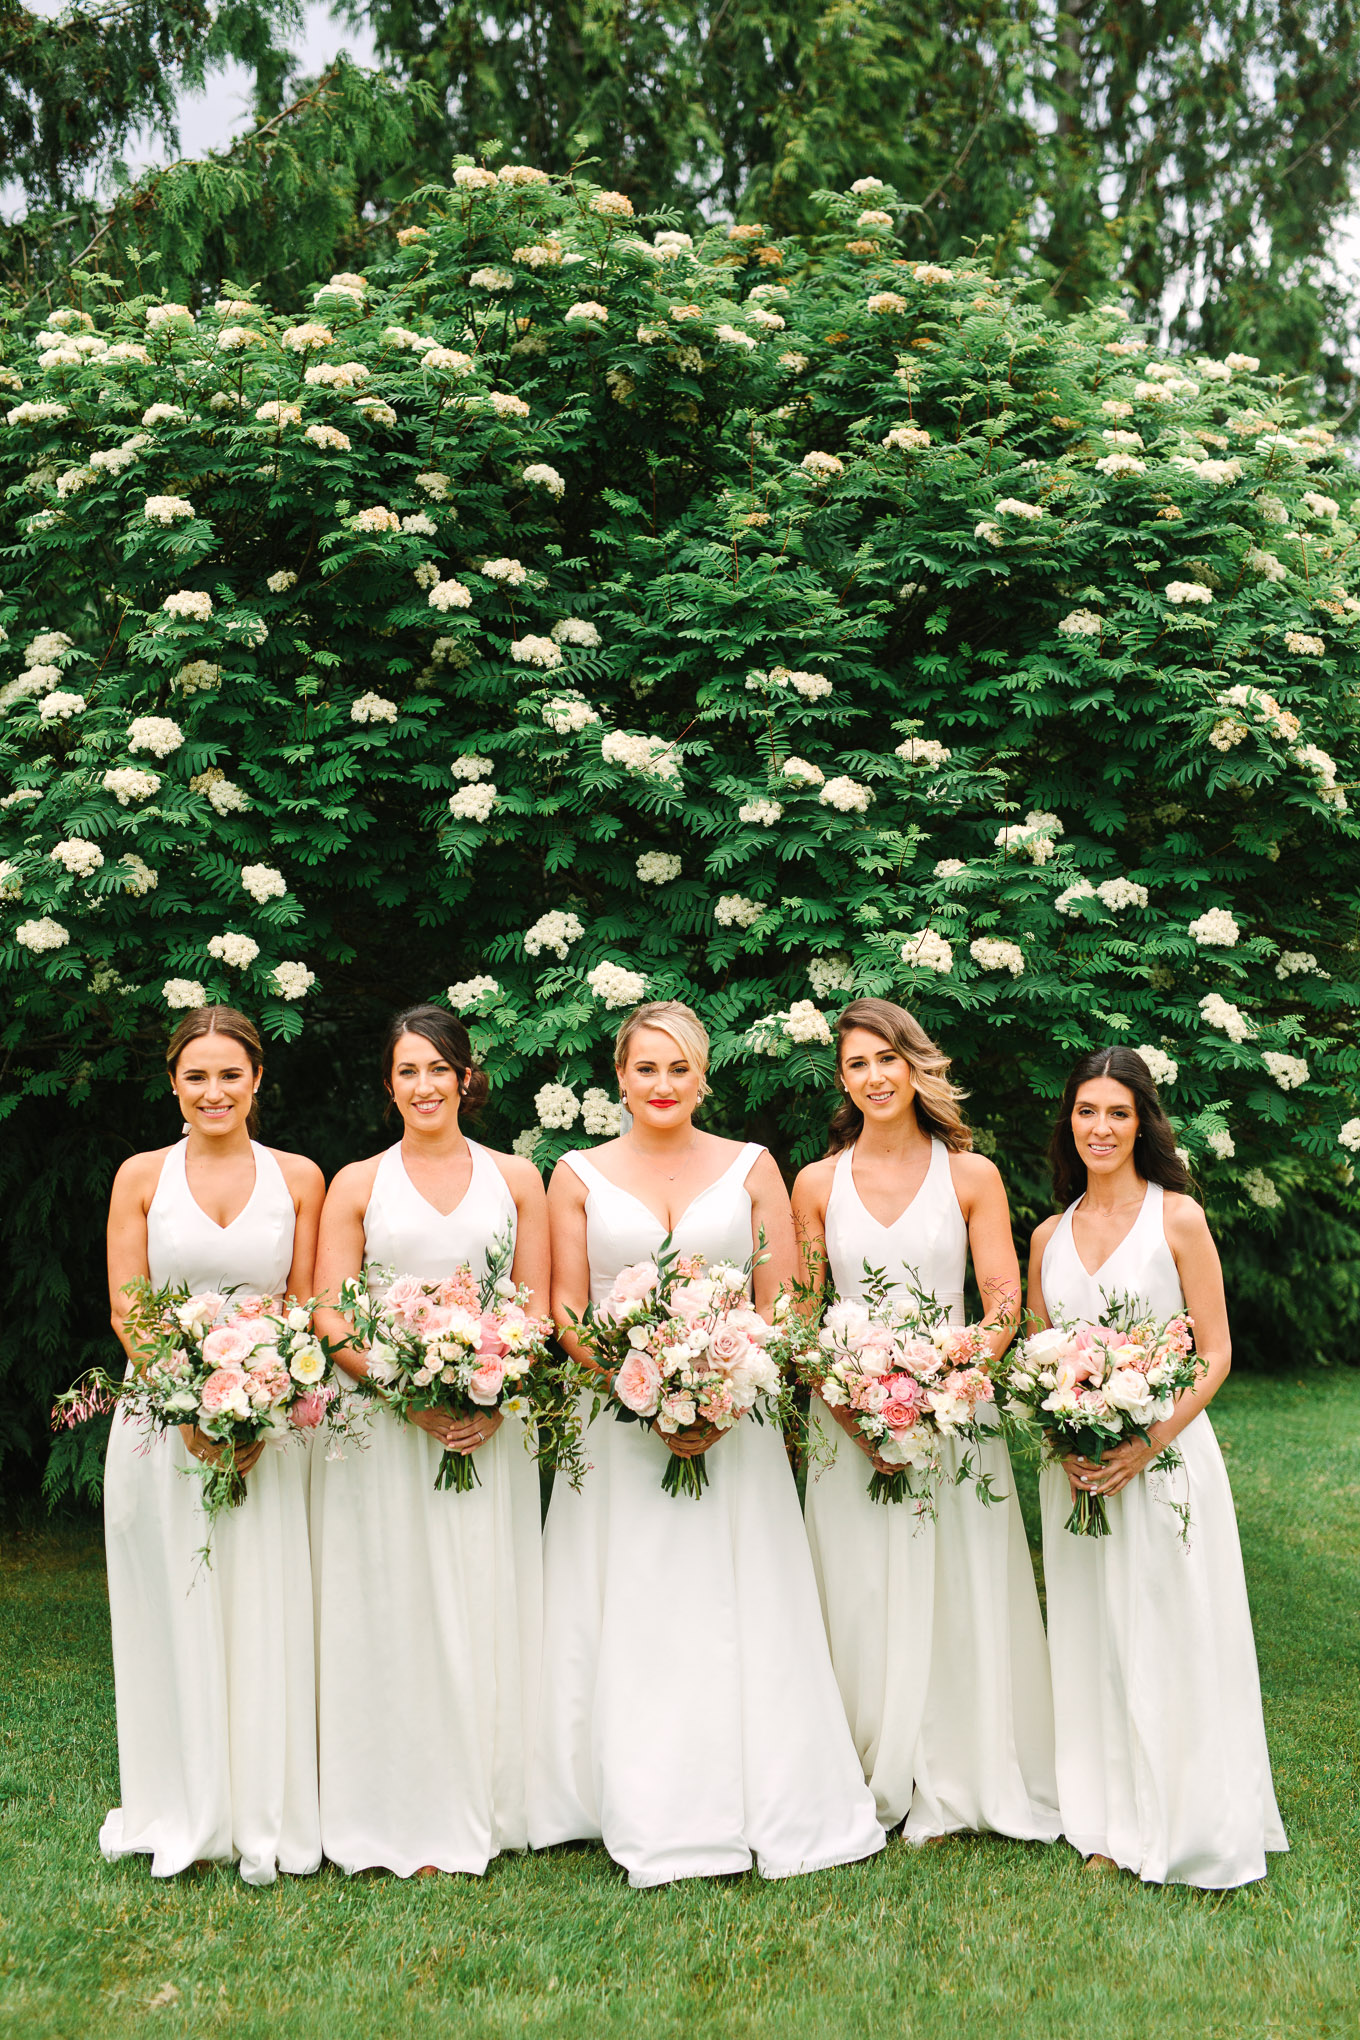 Bridal party in all white with neutral color palette bouquets. Beautiful light pink and neutral bridal bouquet. Millbrook Resort Queenstown New Zealand wedding by Mary Costa Photography | www.marycostaweddings.com